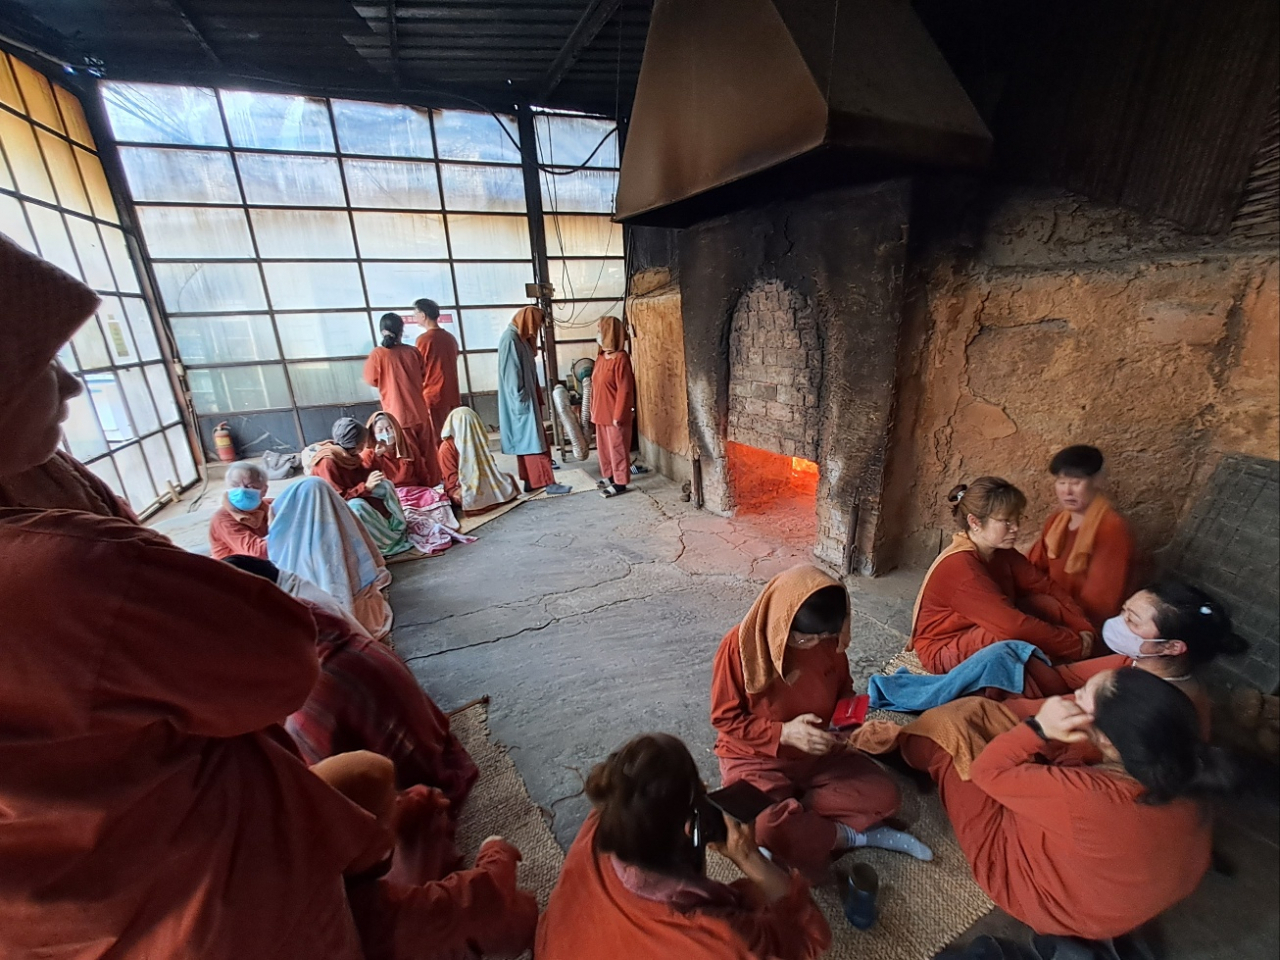 Sauna lovers sit around the fire at Jangheung Charcoal Kiln on Monday. (Lee Si-jin/The Korea Herald)